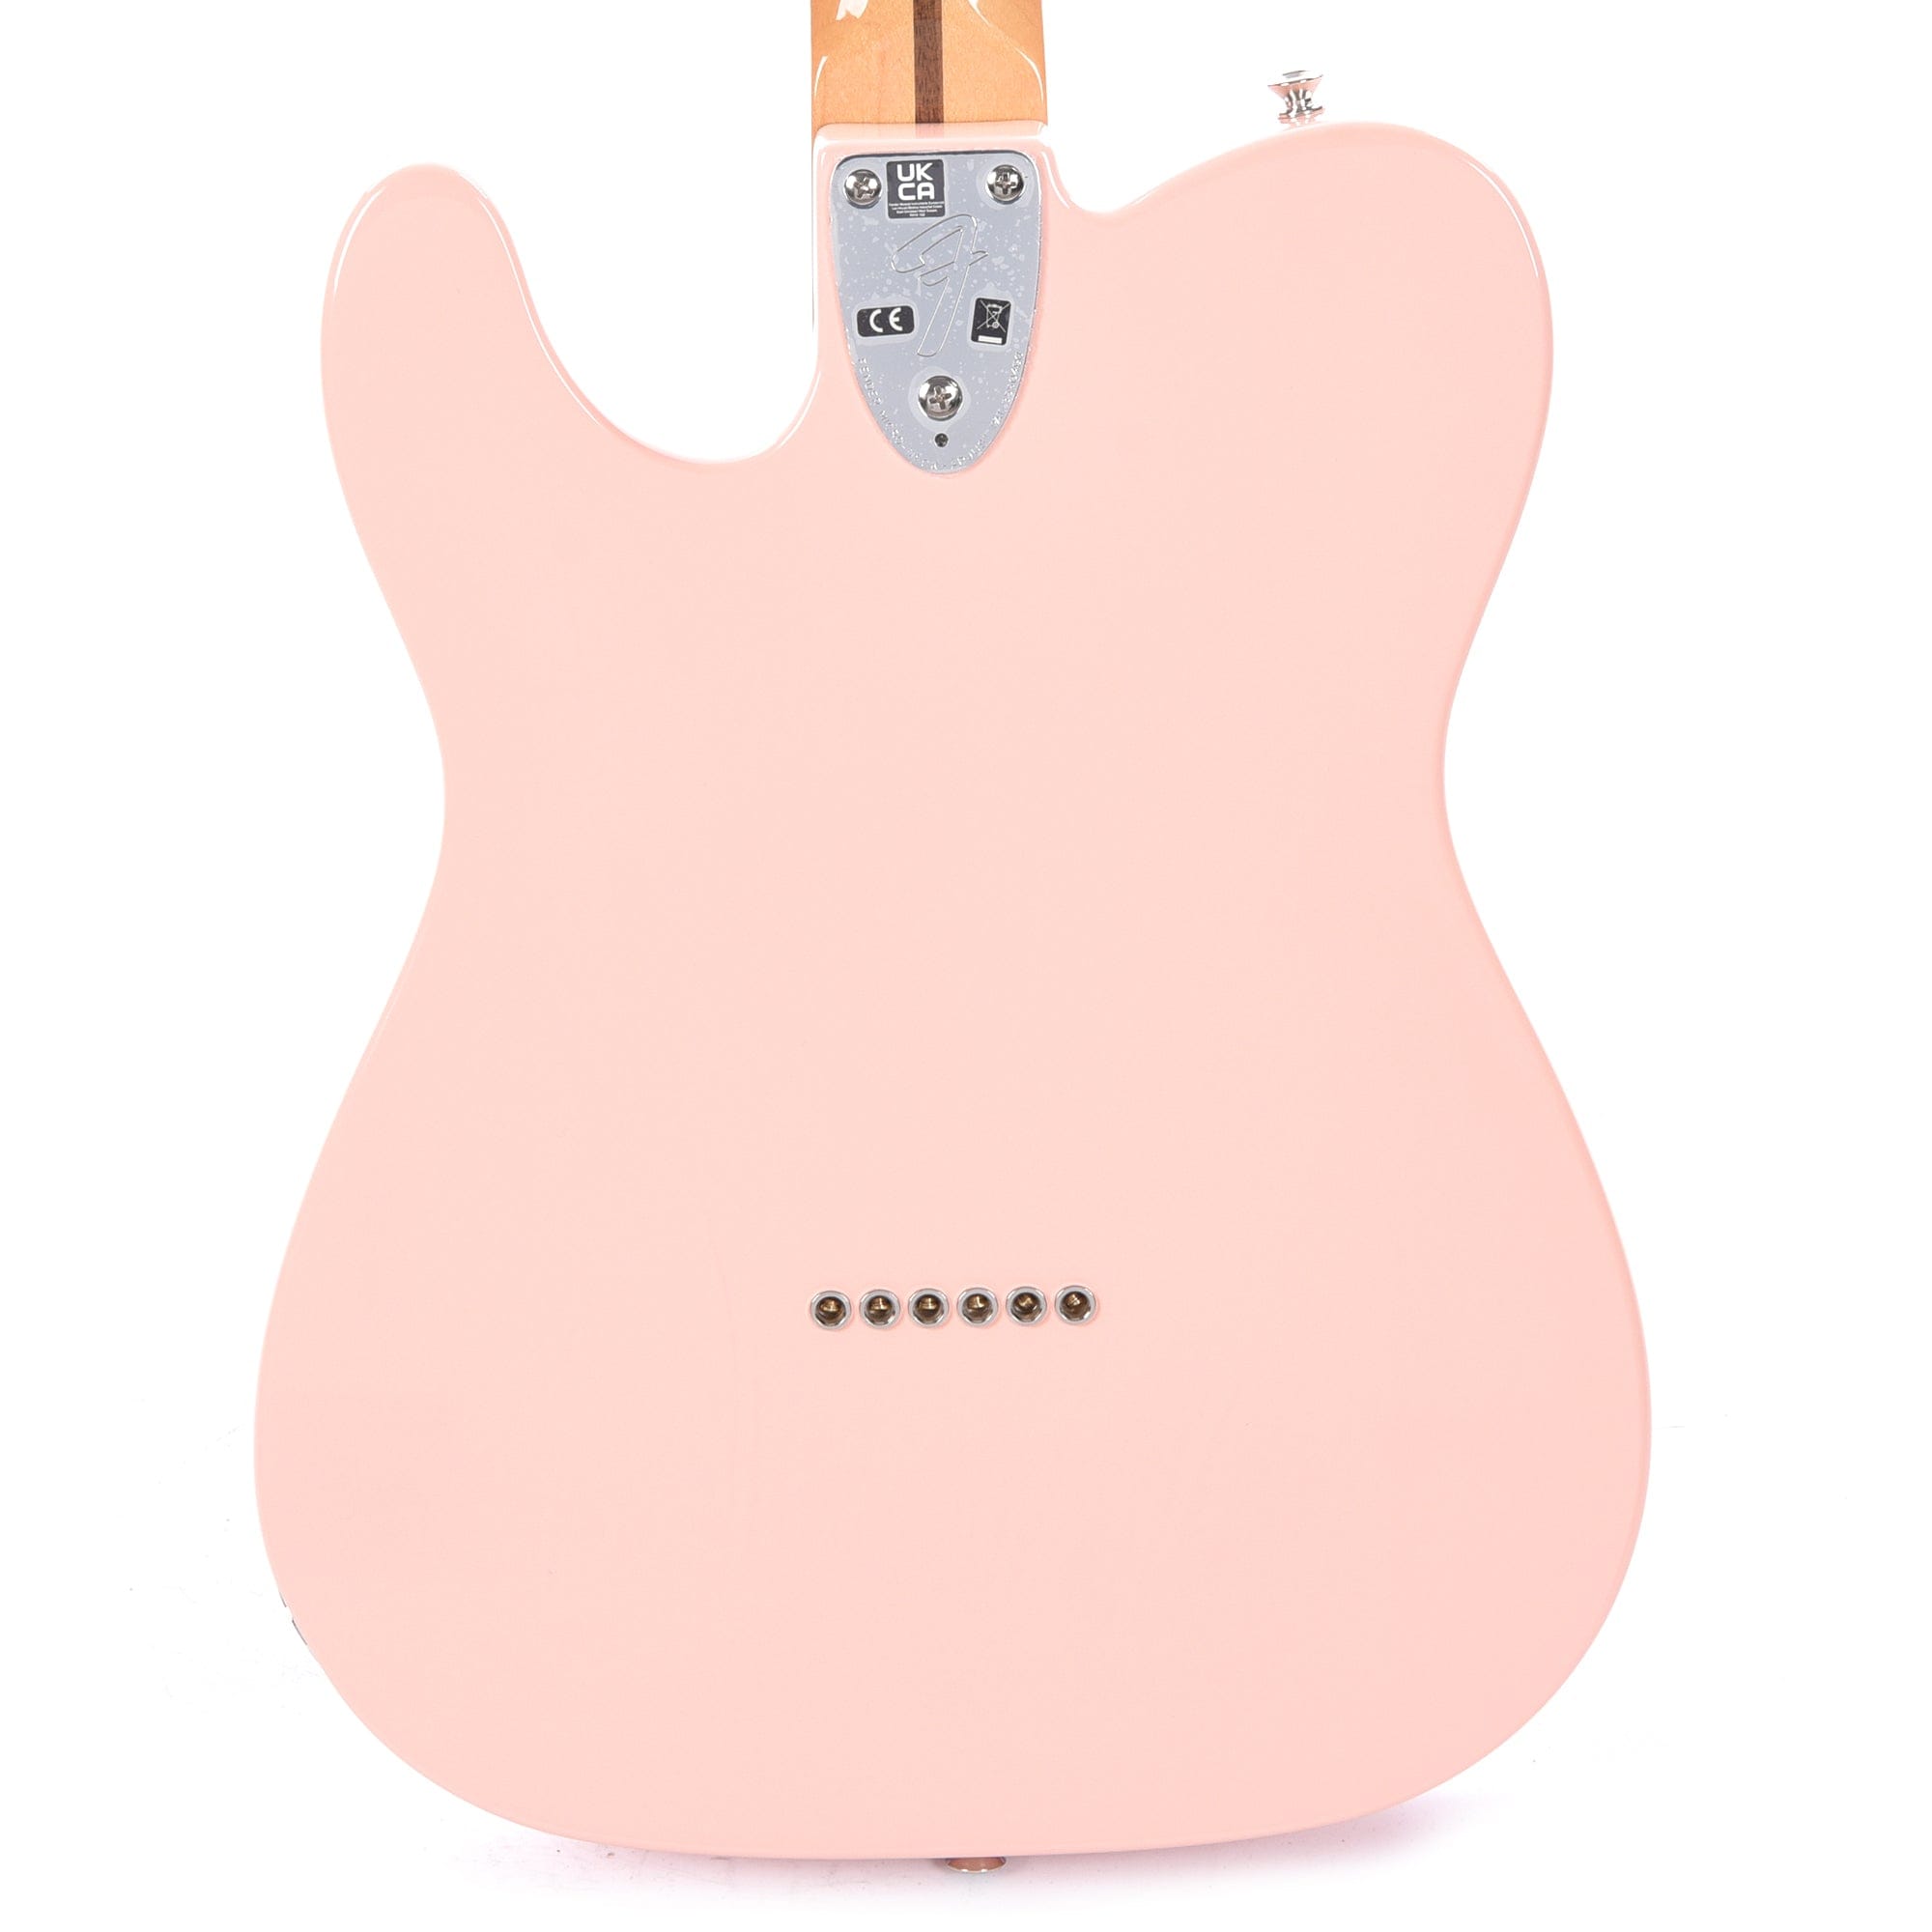 Fender Vintera '70s Telecaster Thinline Shell Pink w/4-Ply Aged Pearl Pickguard Electric Guitars / Semi-Hollow